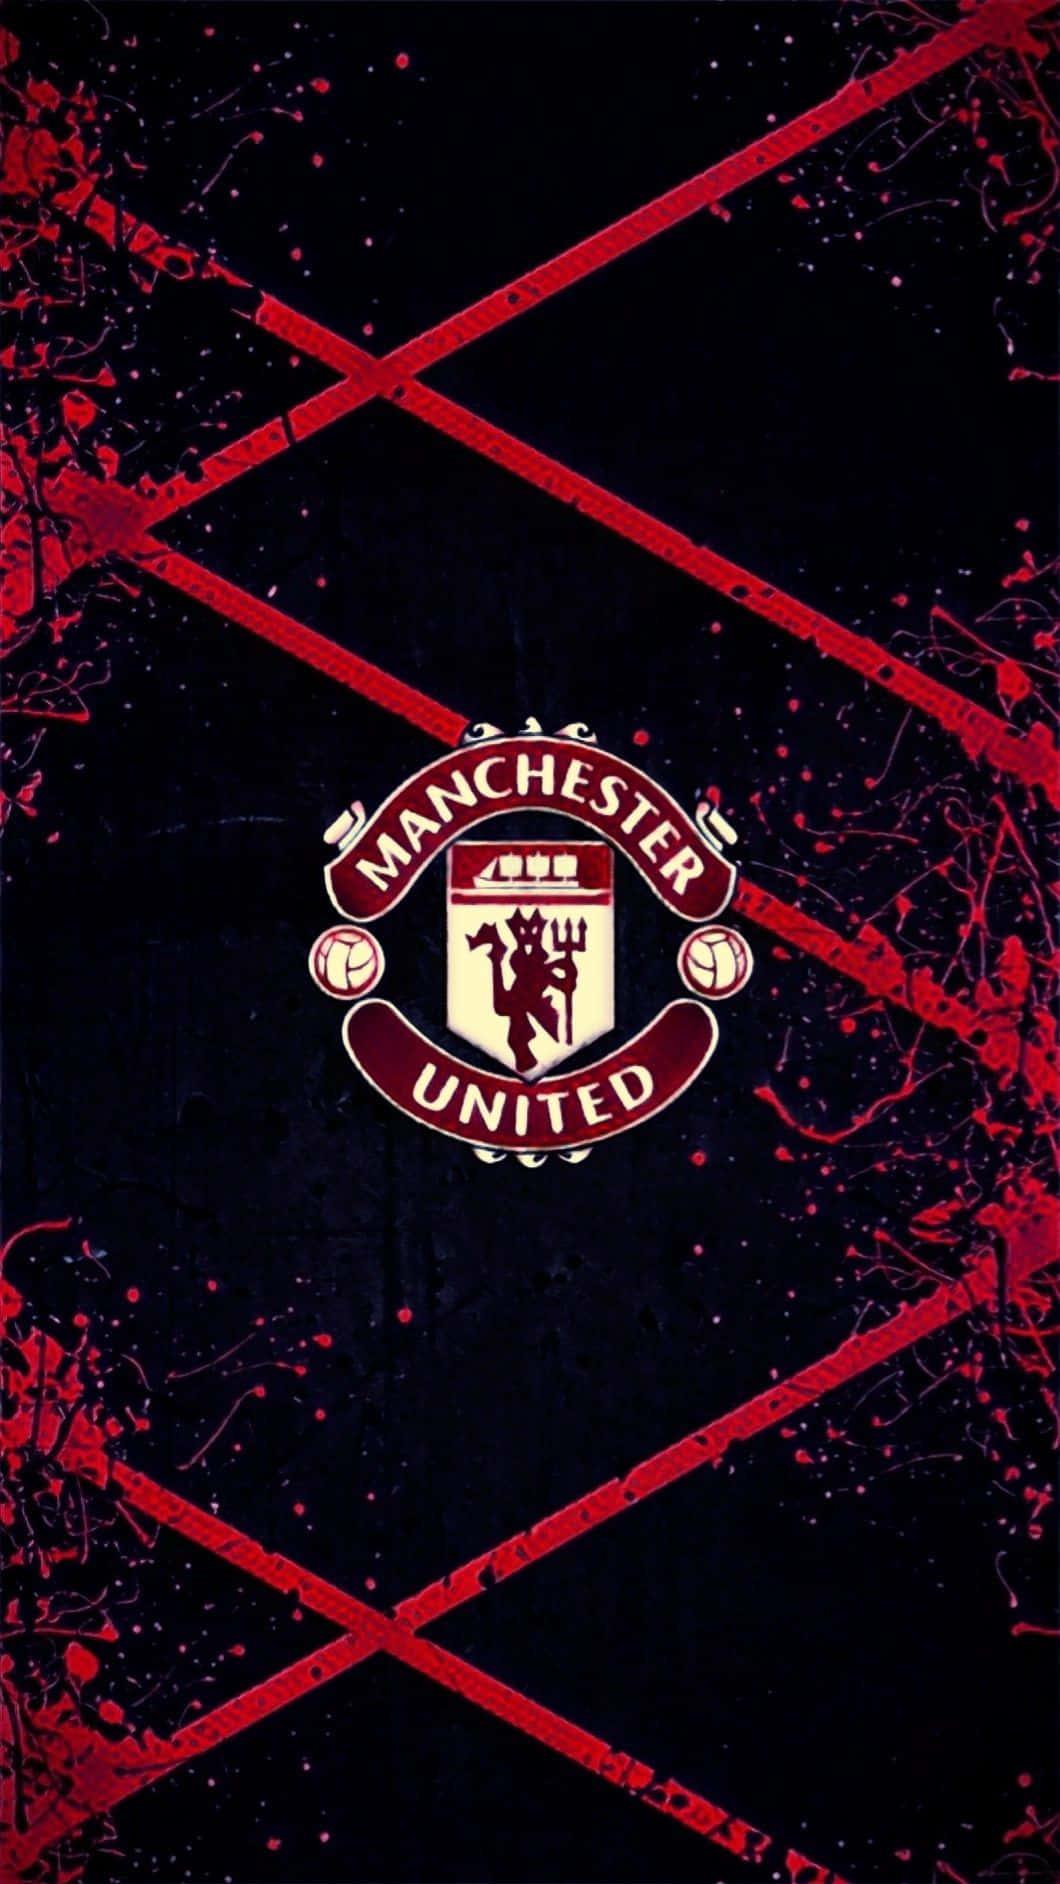 Download Brighten your day with Manchester United Football Club